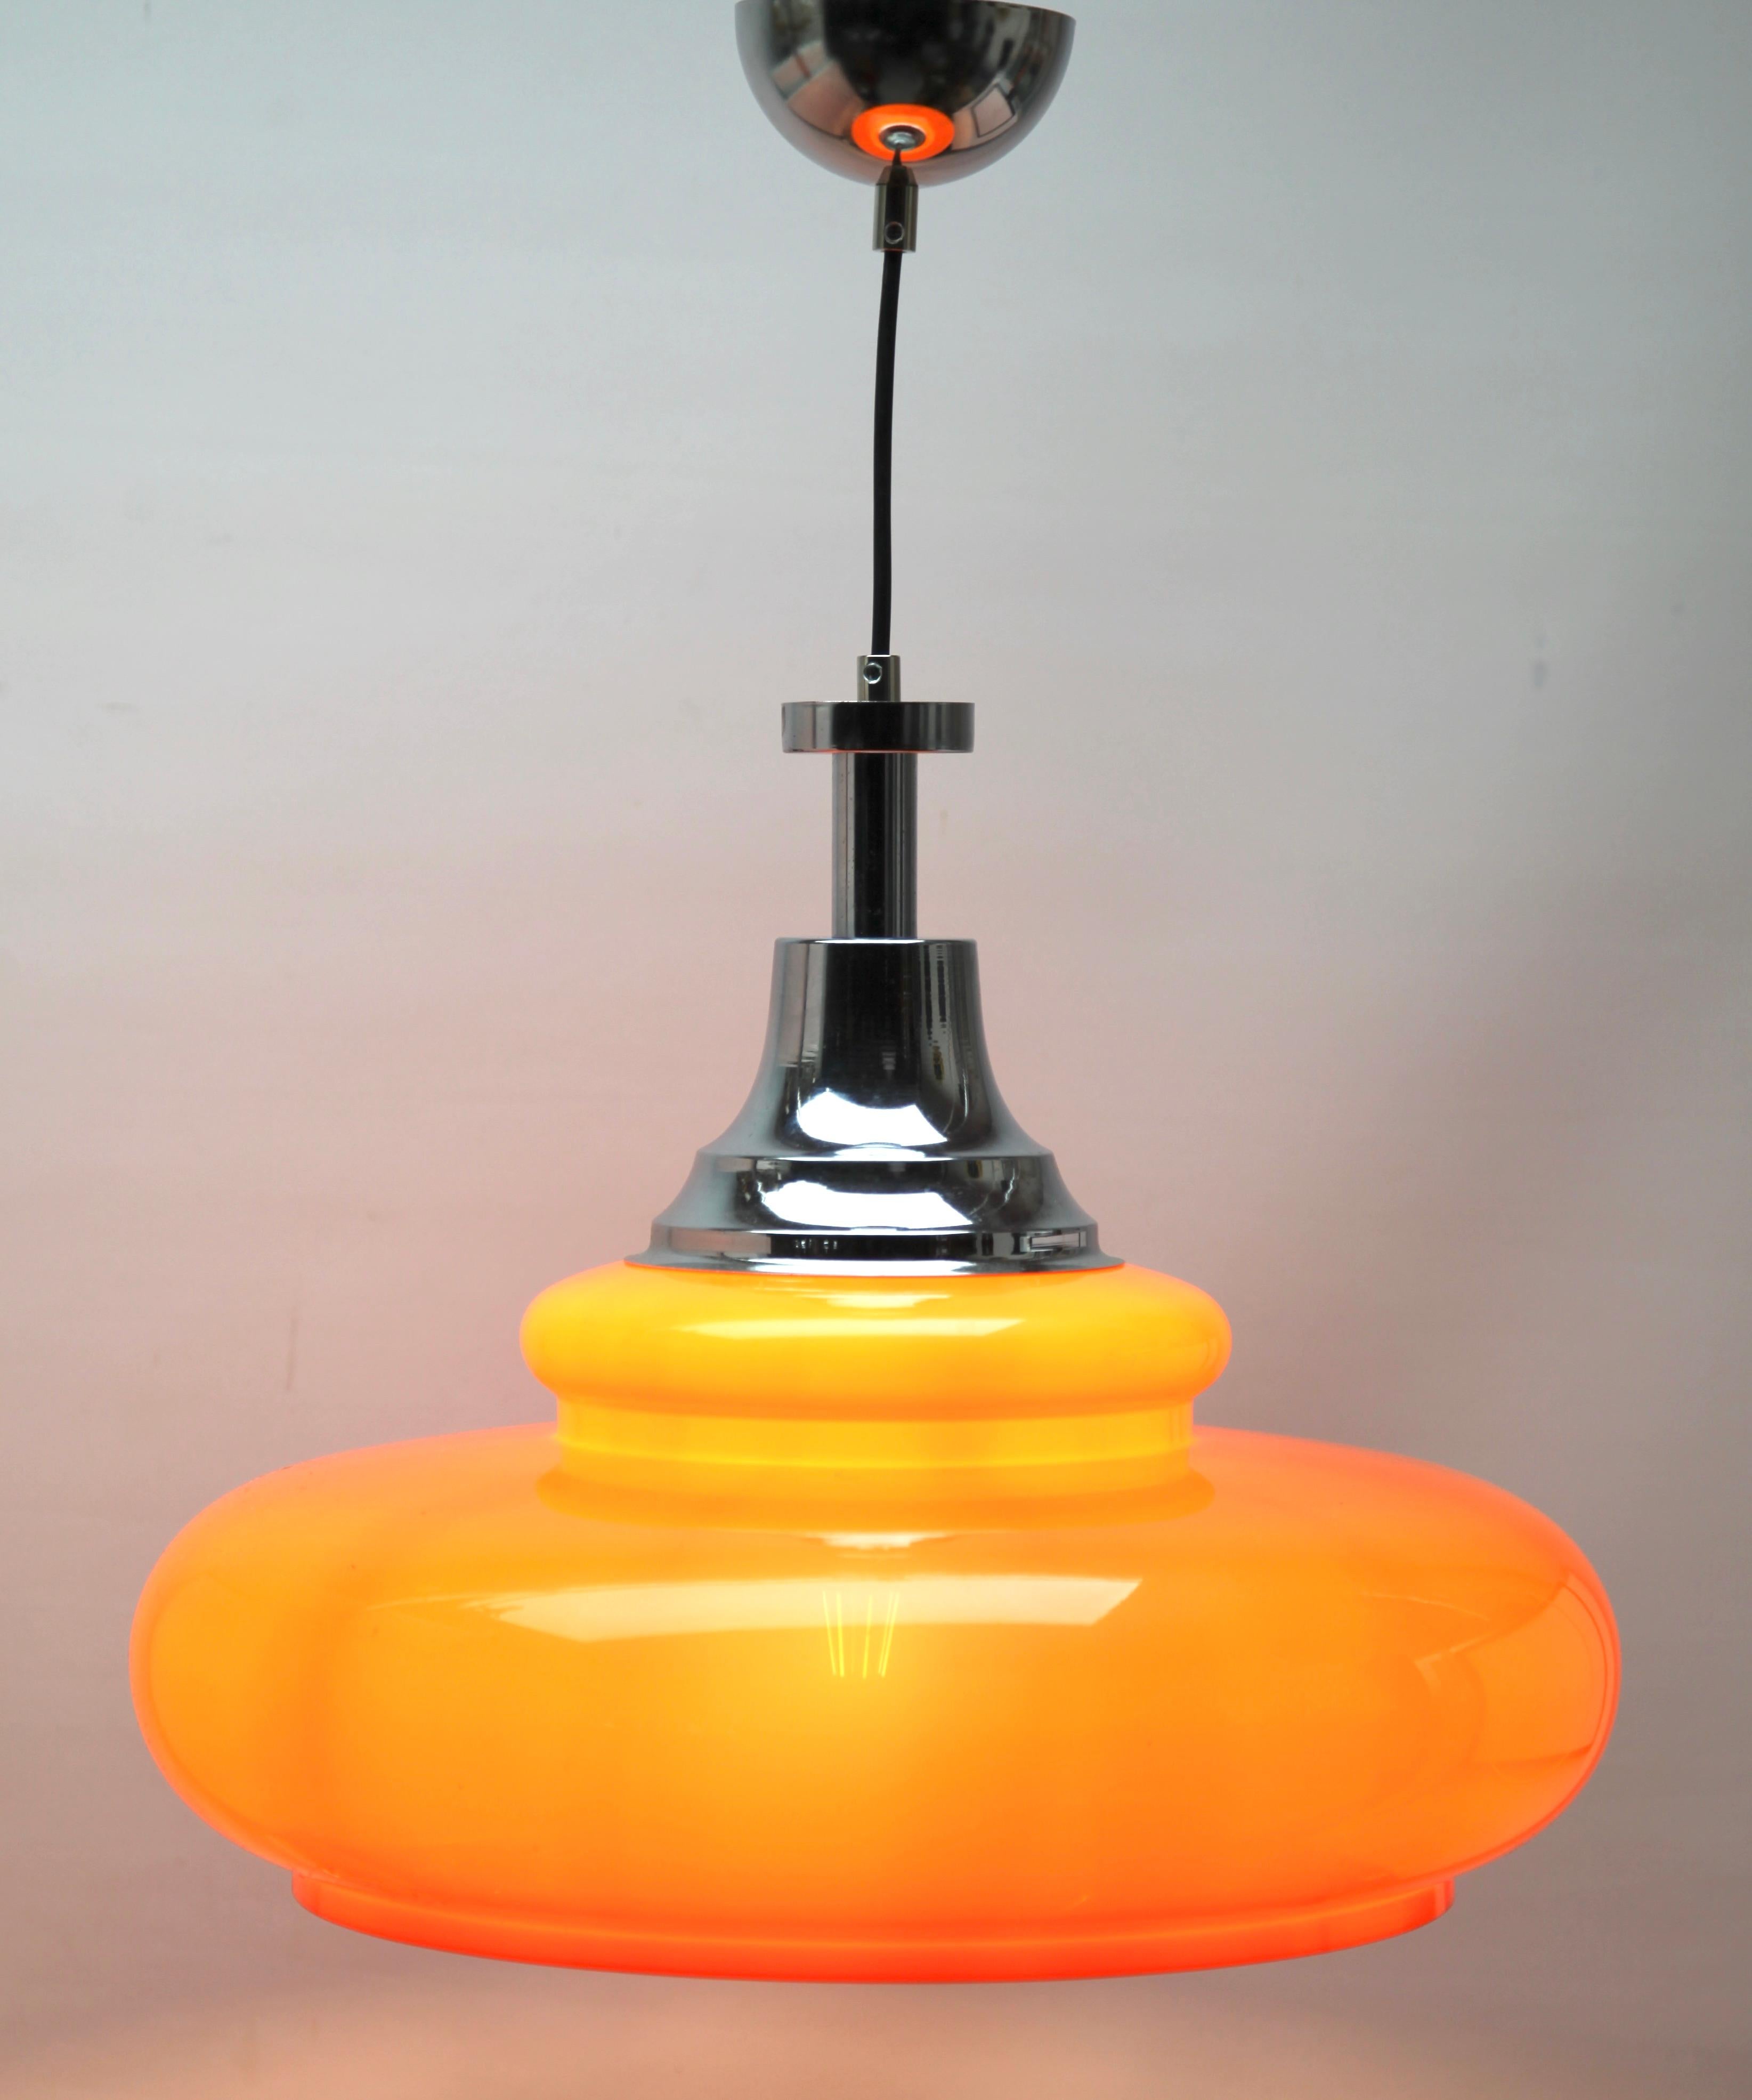 Hanging pendant light from the late 1960s designed in the Scandinavian style and Acrylic Shade 
Its Classic modernist form and simplicity in design, make it an iconic example of midcentury home lighting.
Size shade: Diameter 15.76 -inch